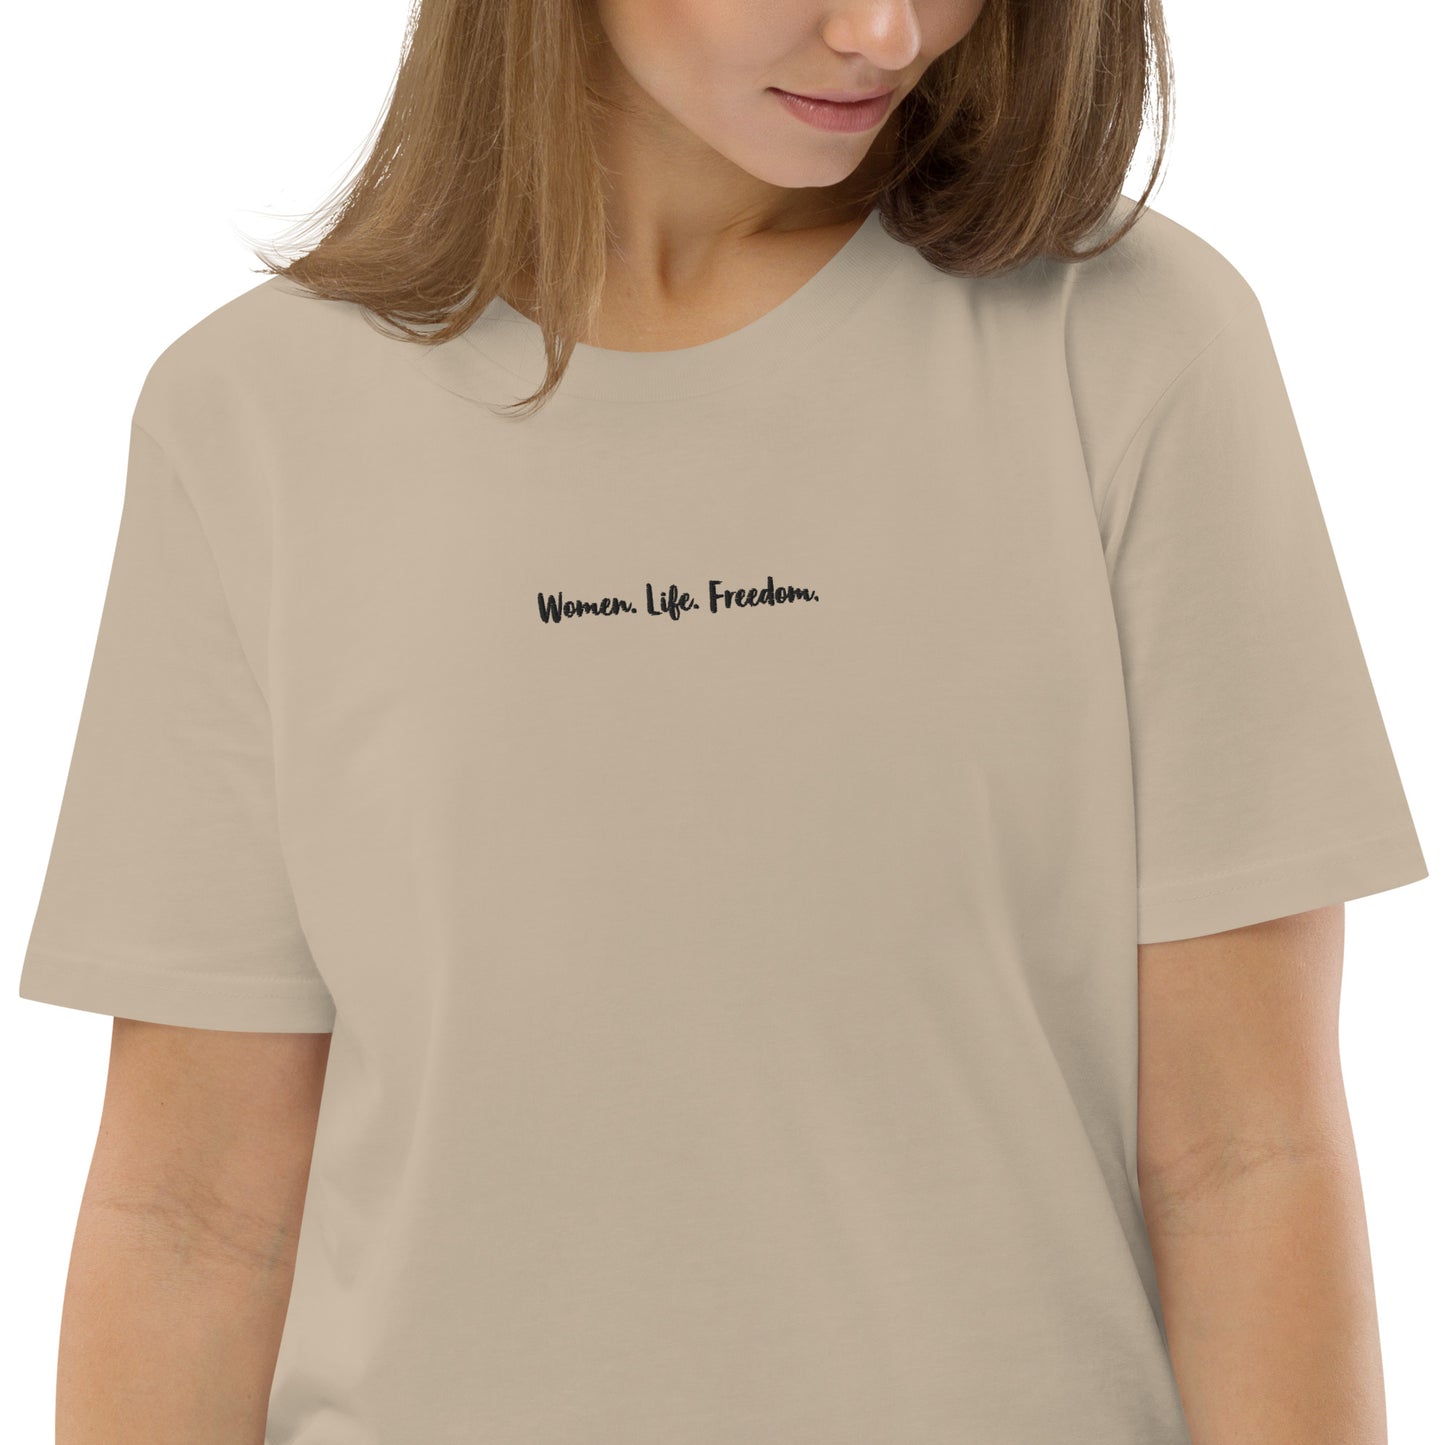 Women. Life. Freedom. T-shirt in Beige. In support for Women's equal rights